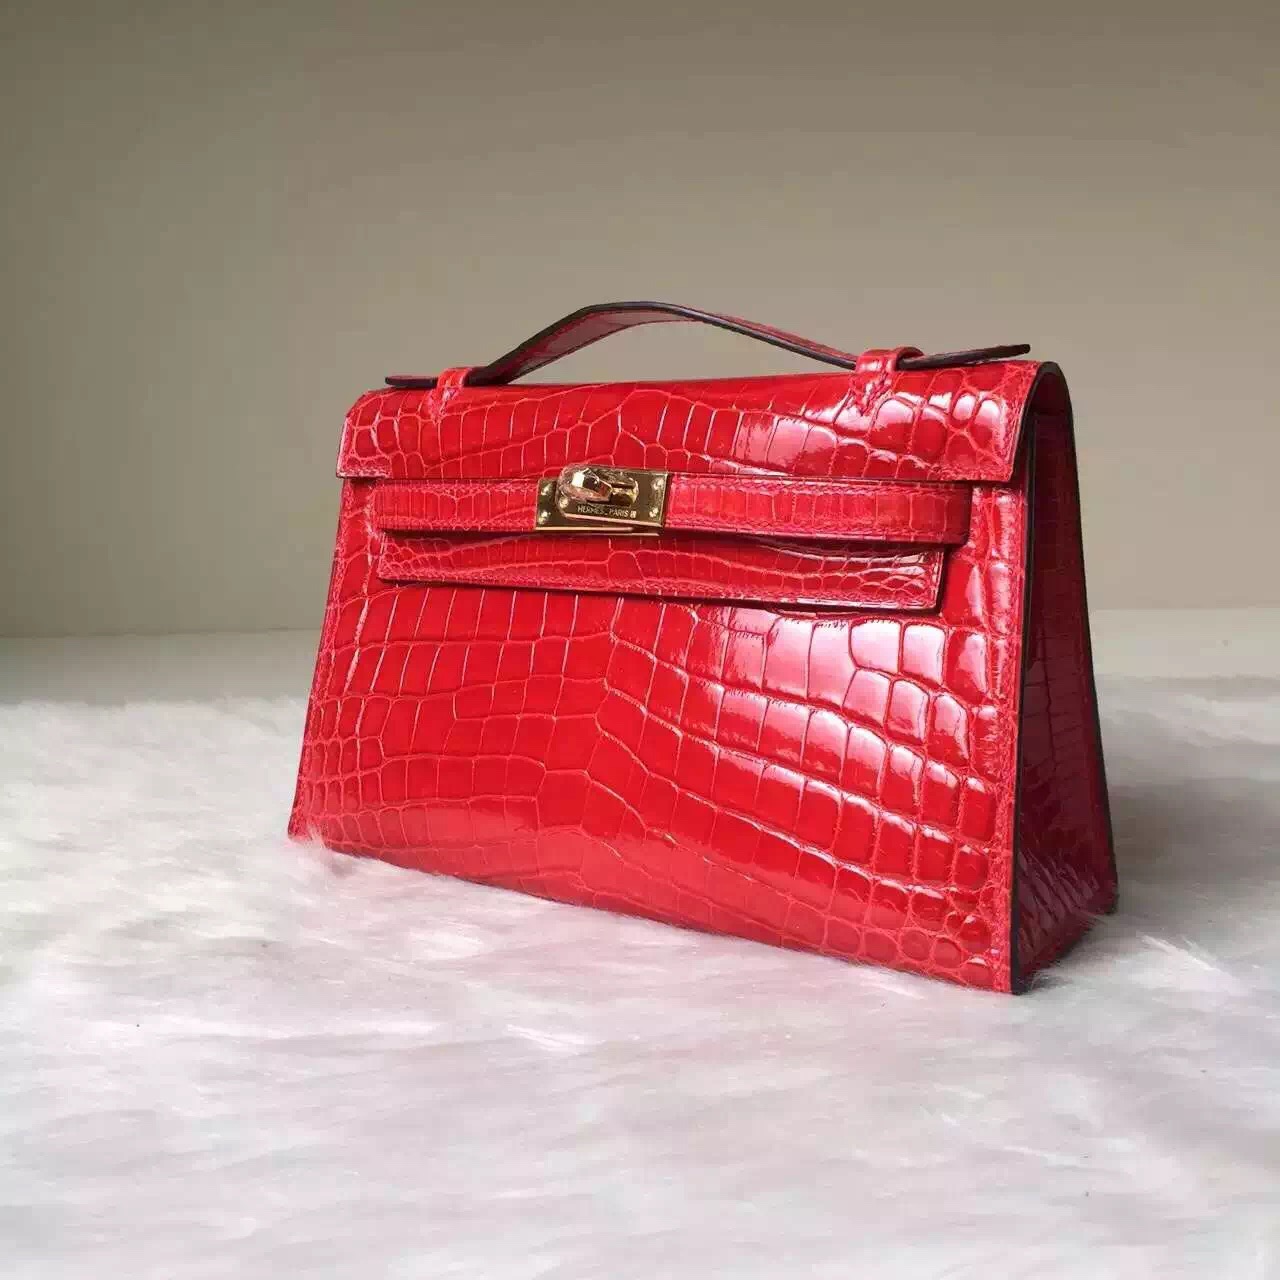 Discount Hermes CK95 Braise Red Crocodile Leather MiniKelly Pochette Bag 22cm